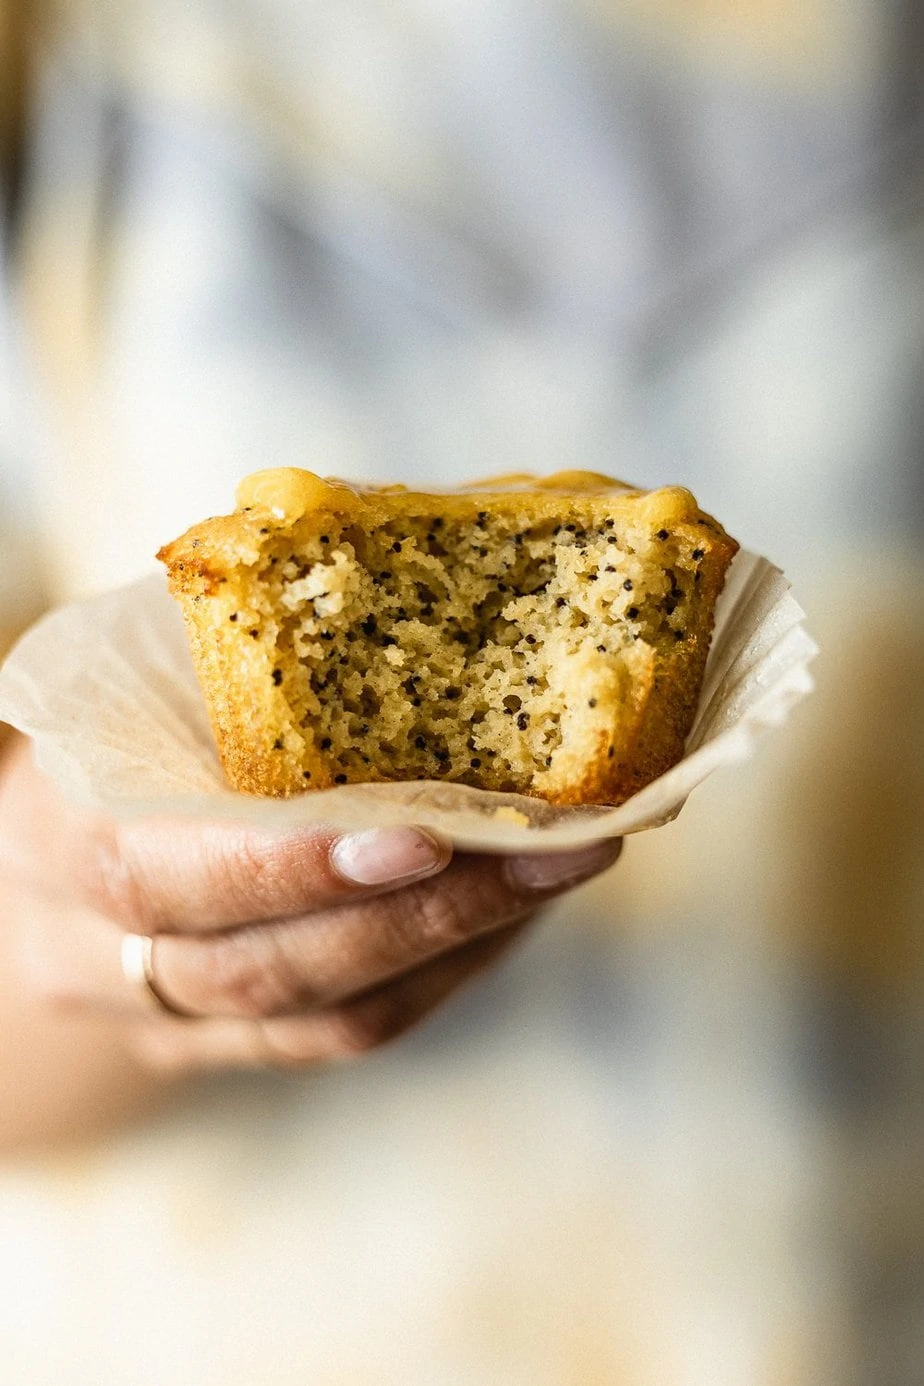 A hand holding a healthy lemon poppy seed muffin with a bite taken out.